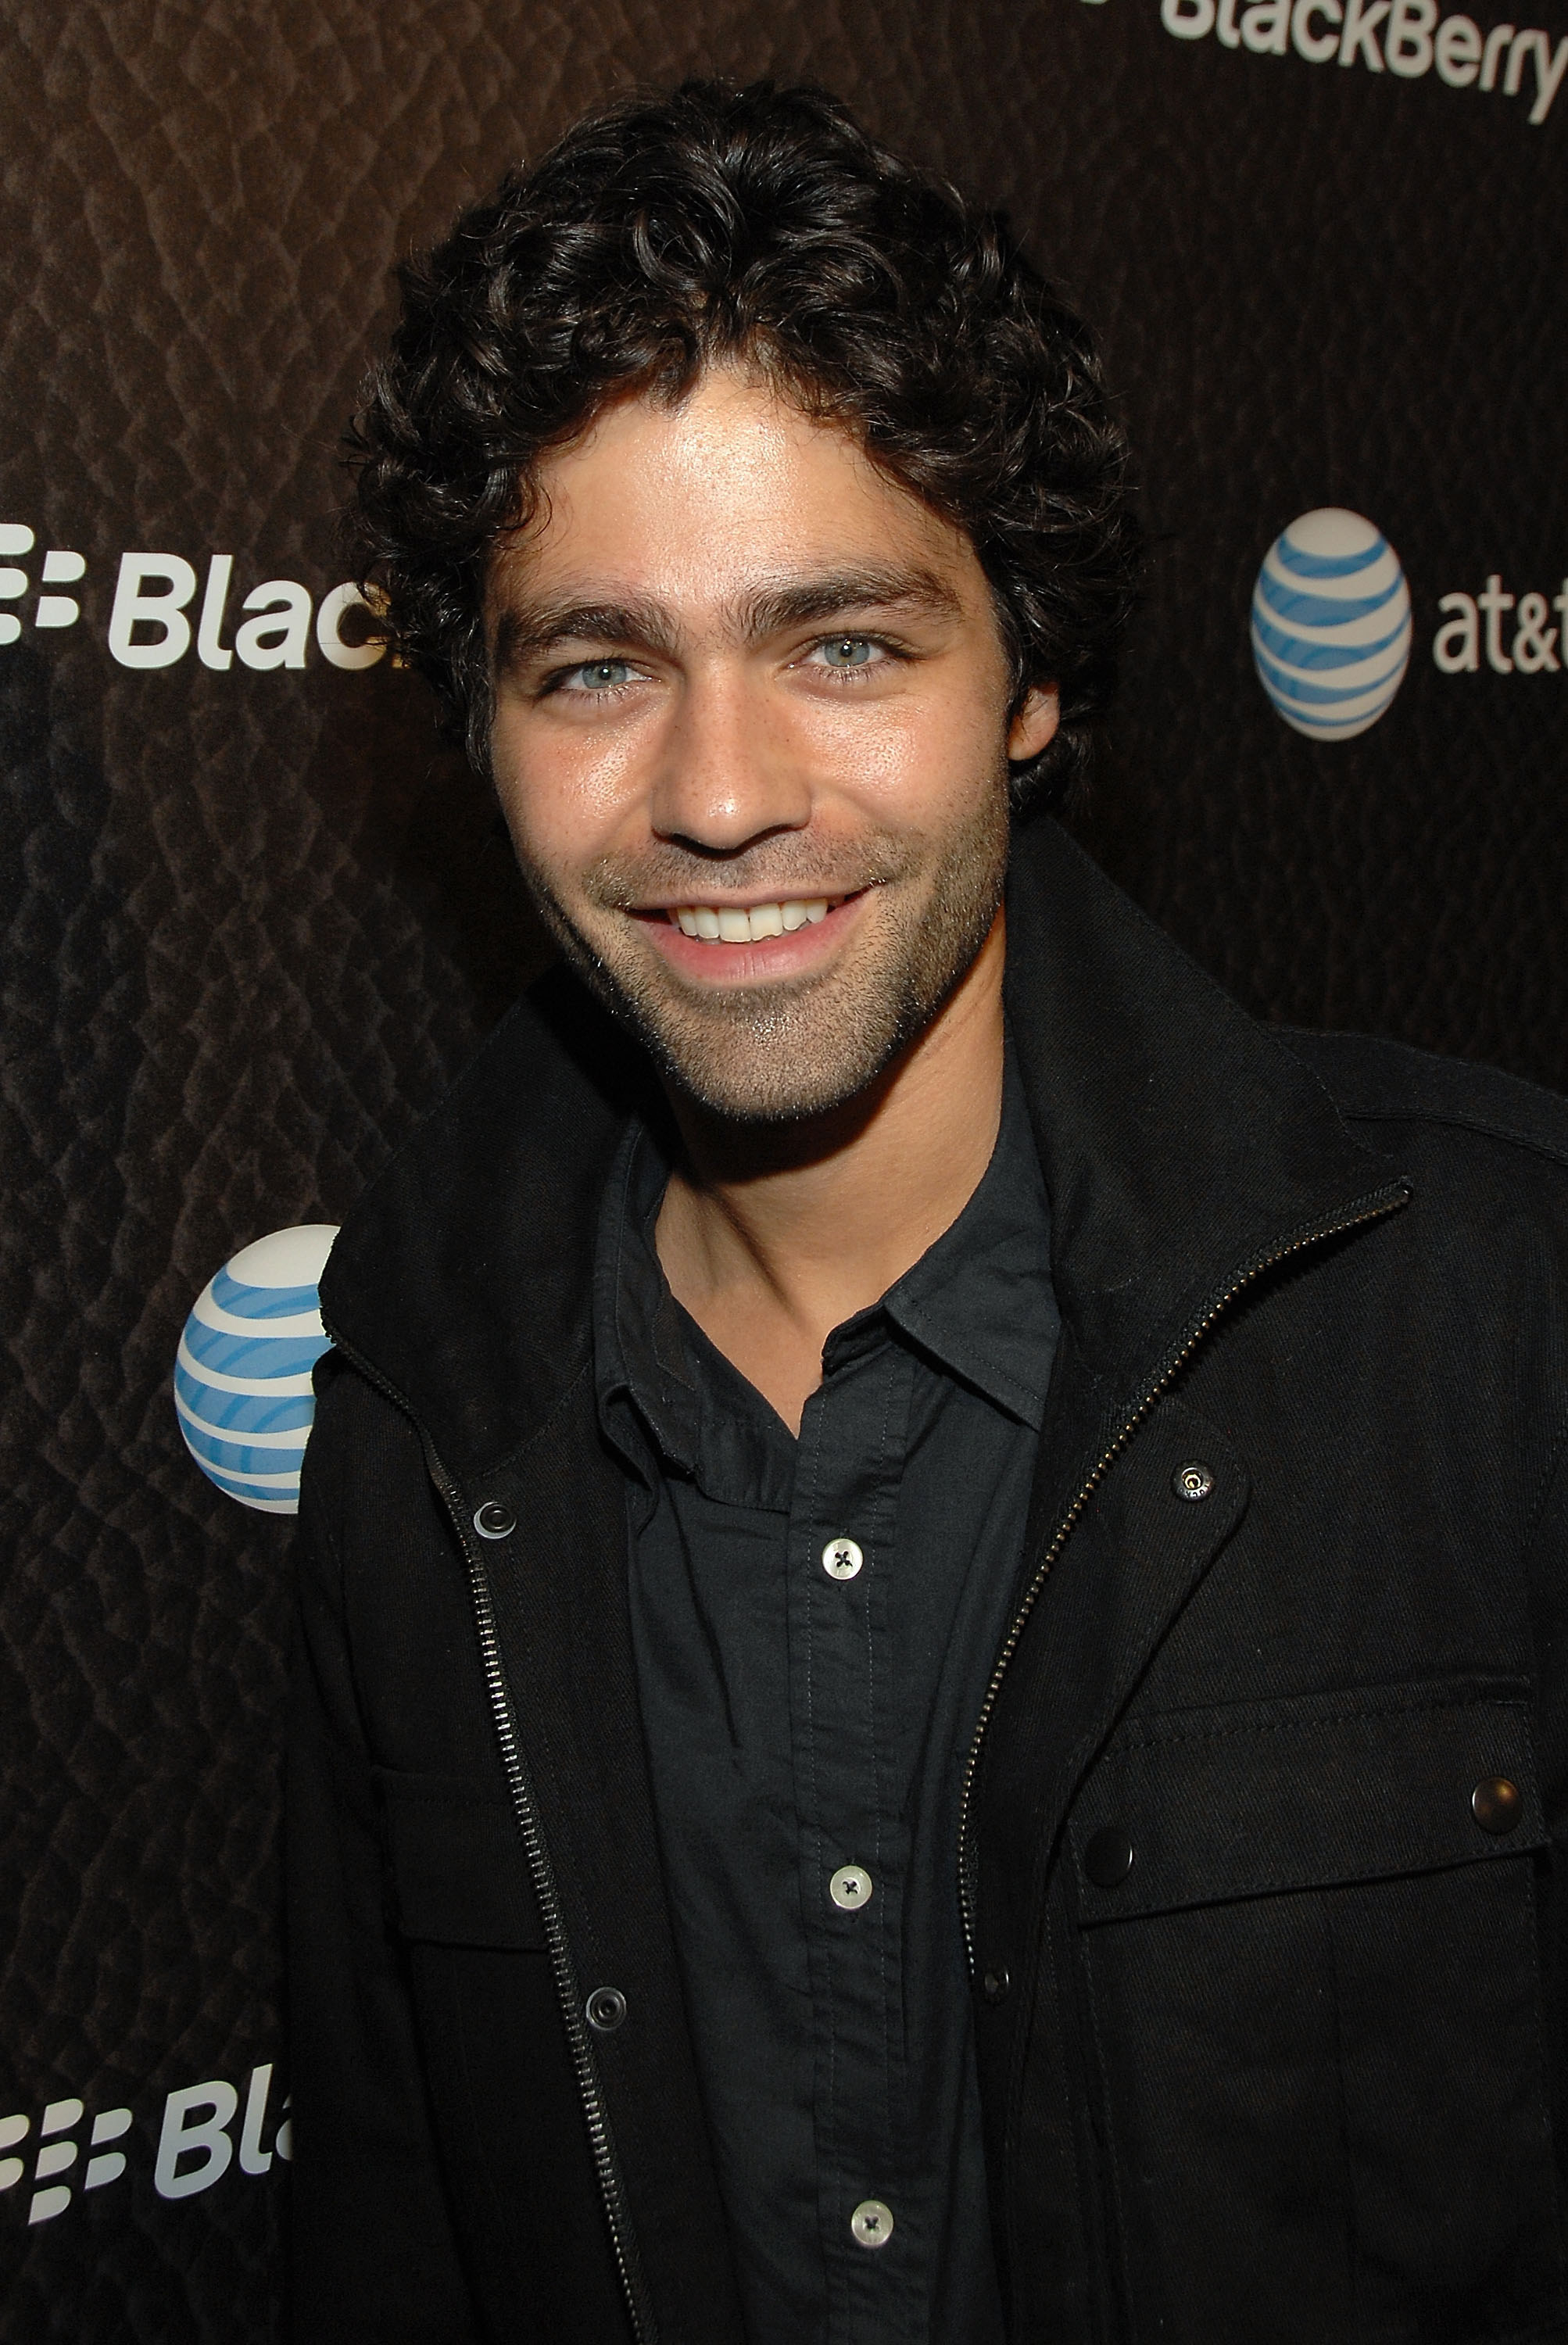 Adrian Grenier poses at a launch party for Blackberry Bold on October 30, 2008